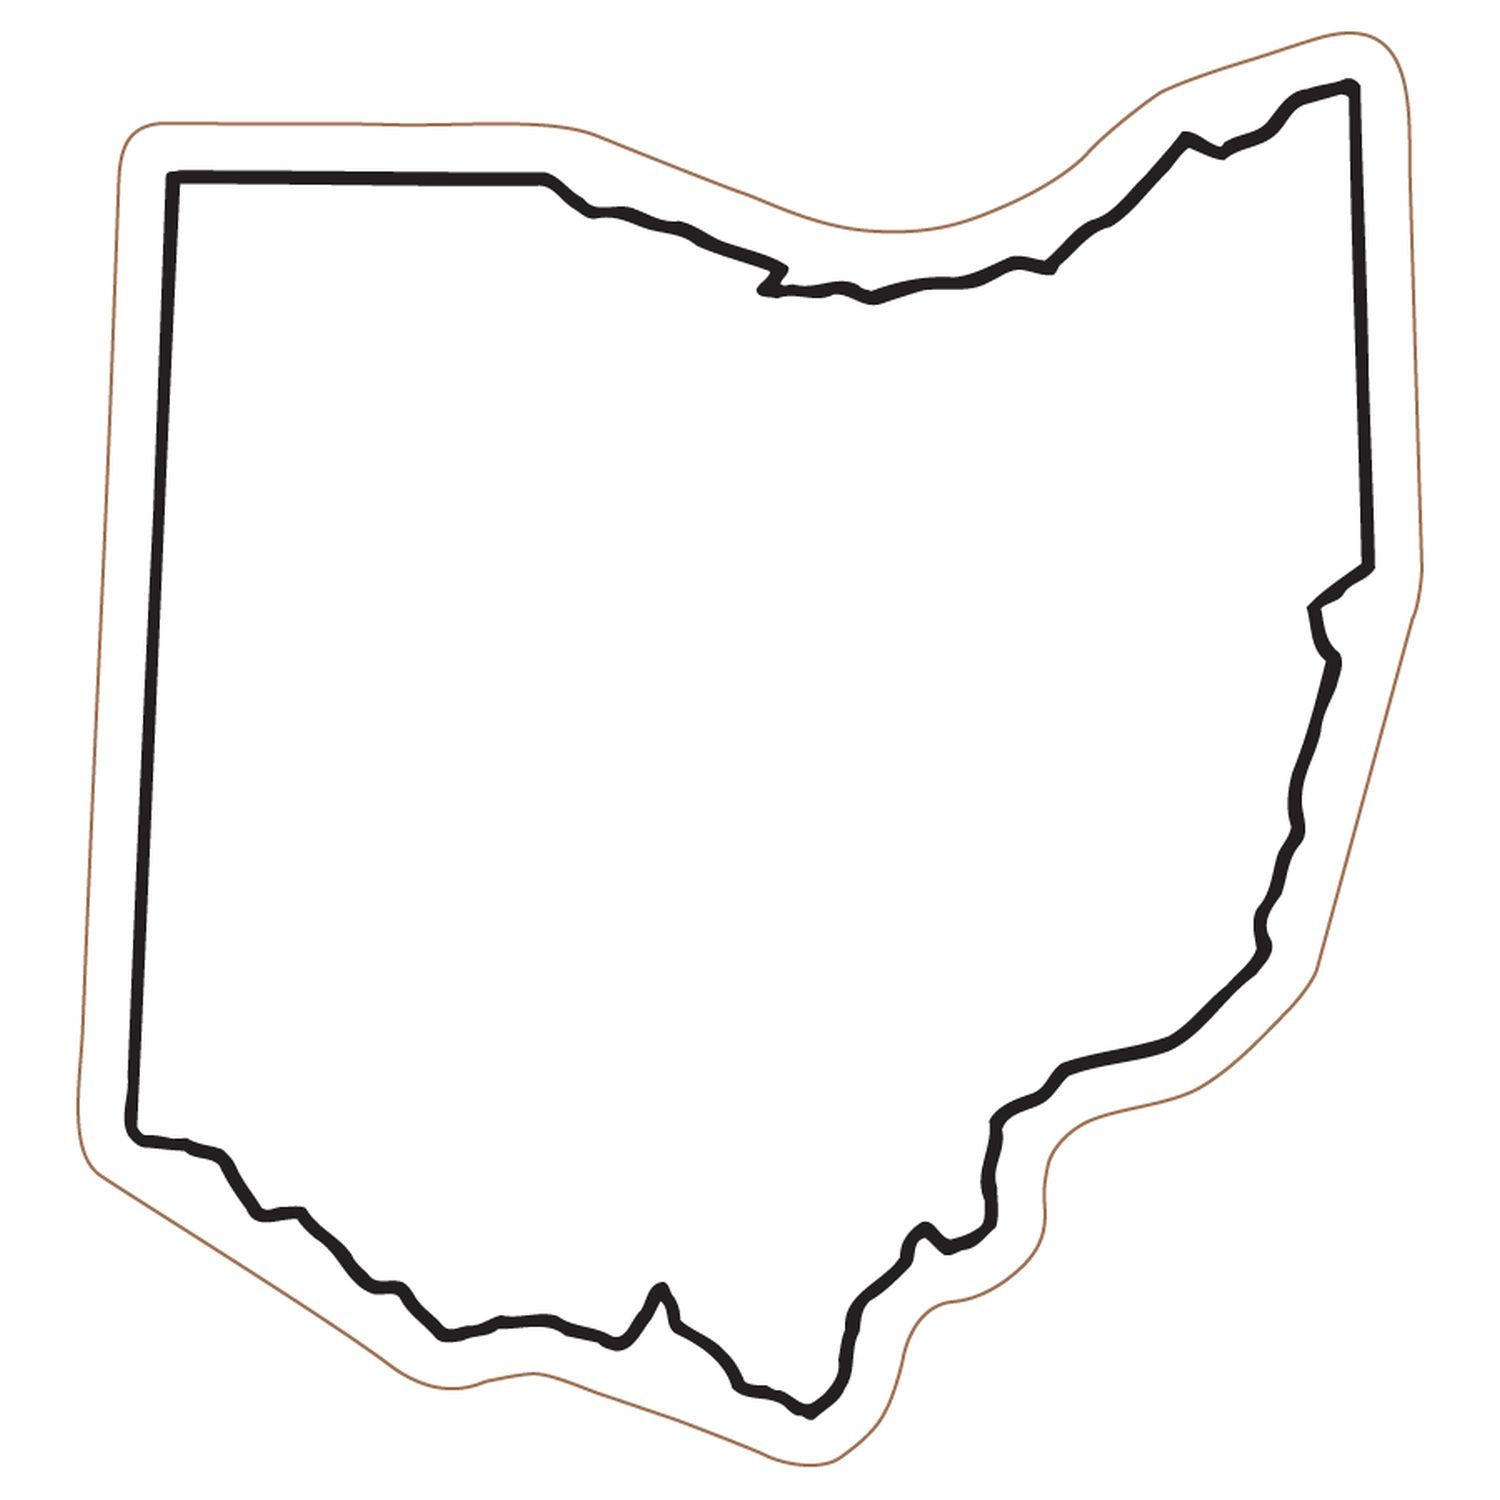 Best Photos of Template Of States Shapes - Ohio State Outline ...